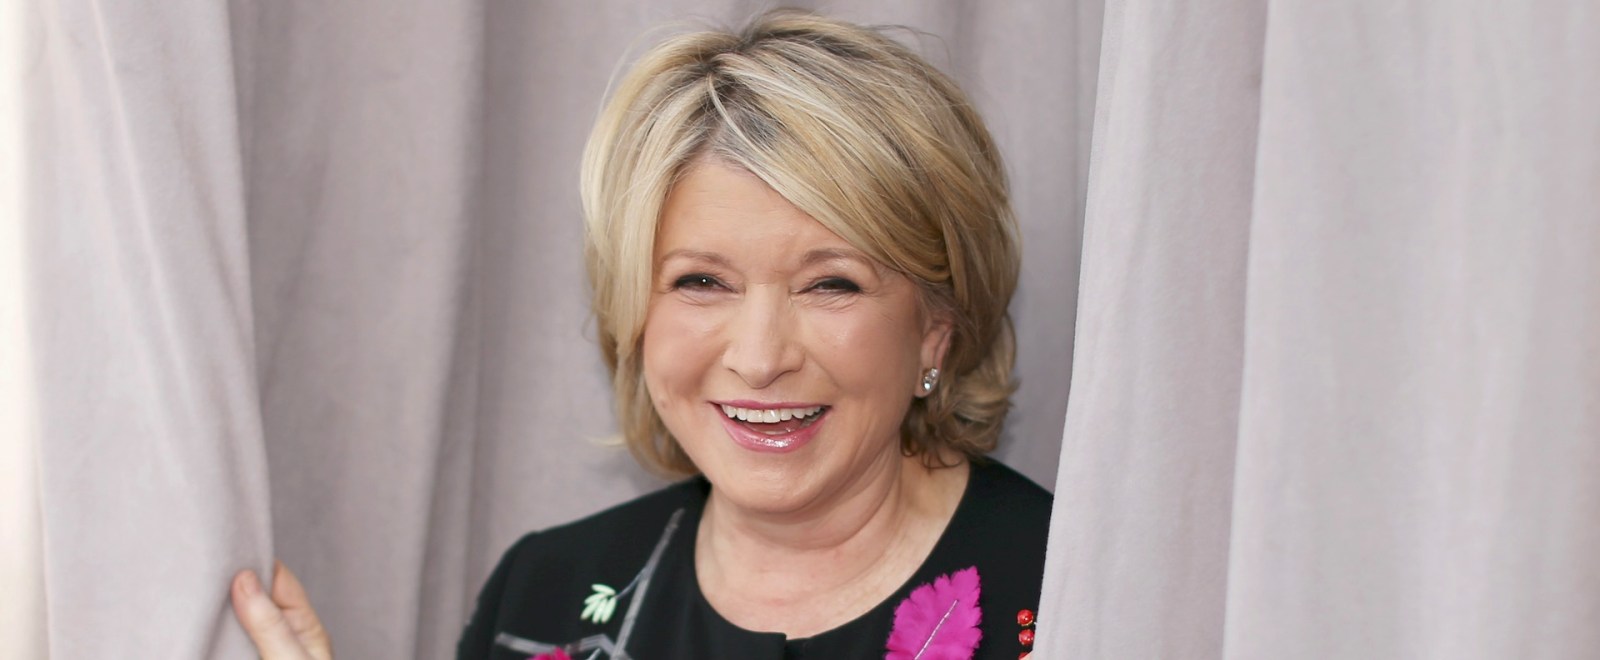 Martha Stewart Would Not Mind Getting In On The Pete Davidson Dating Band Wagon: ‘He’s Sort Of Cute’